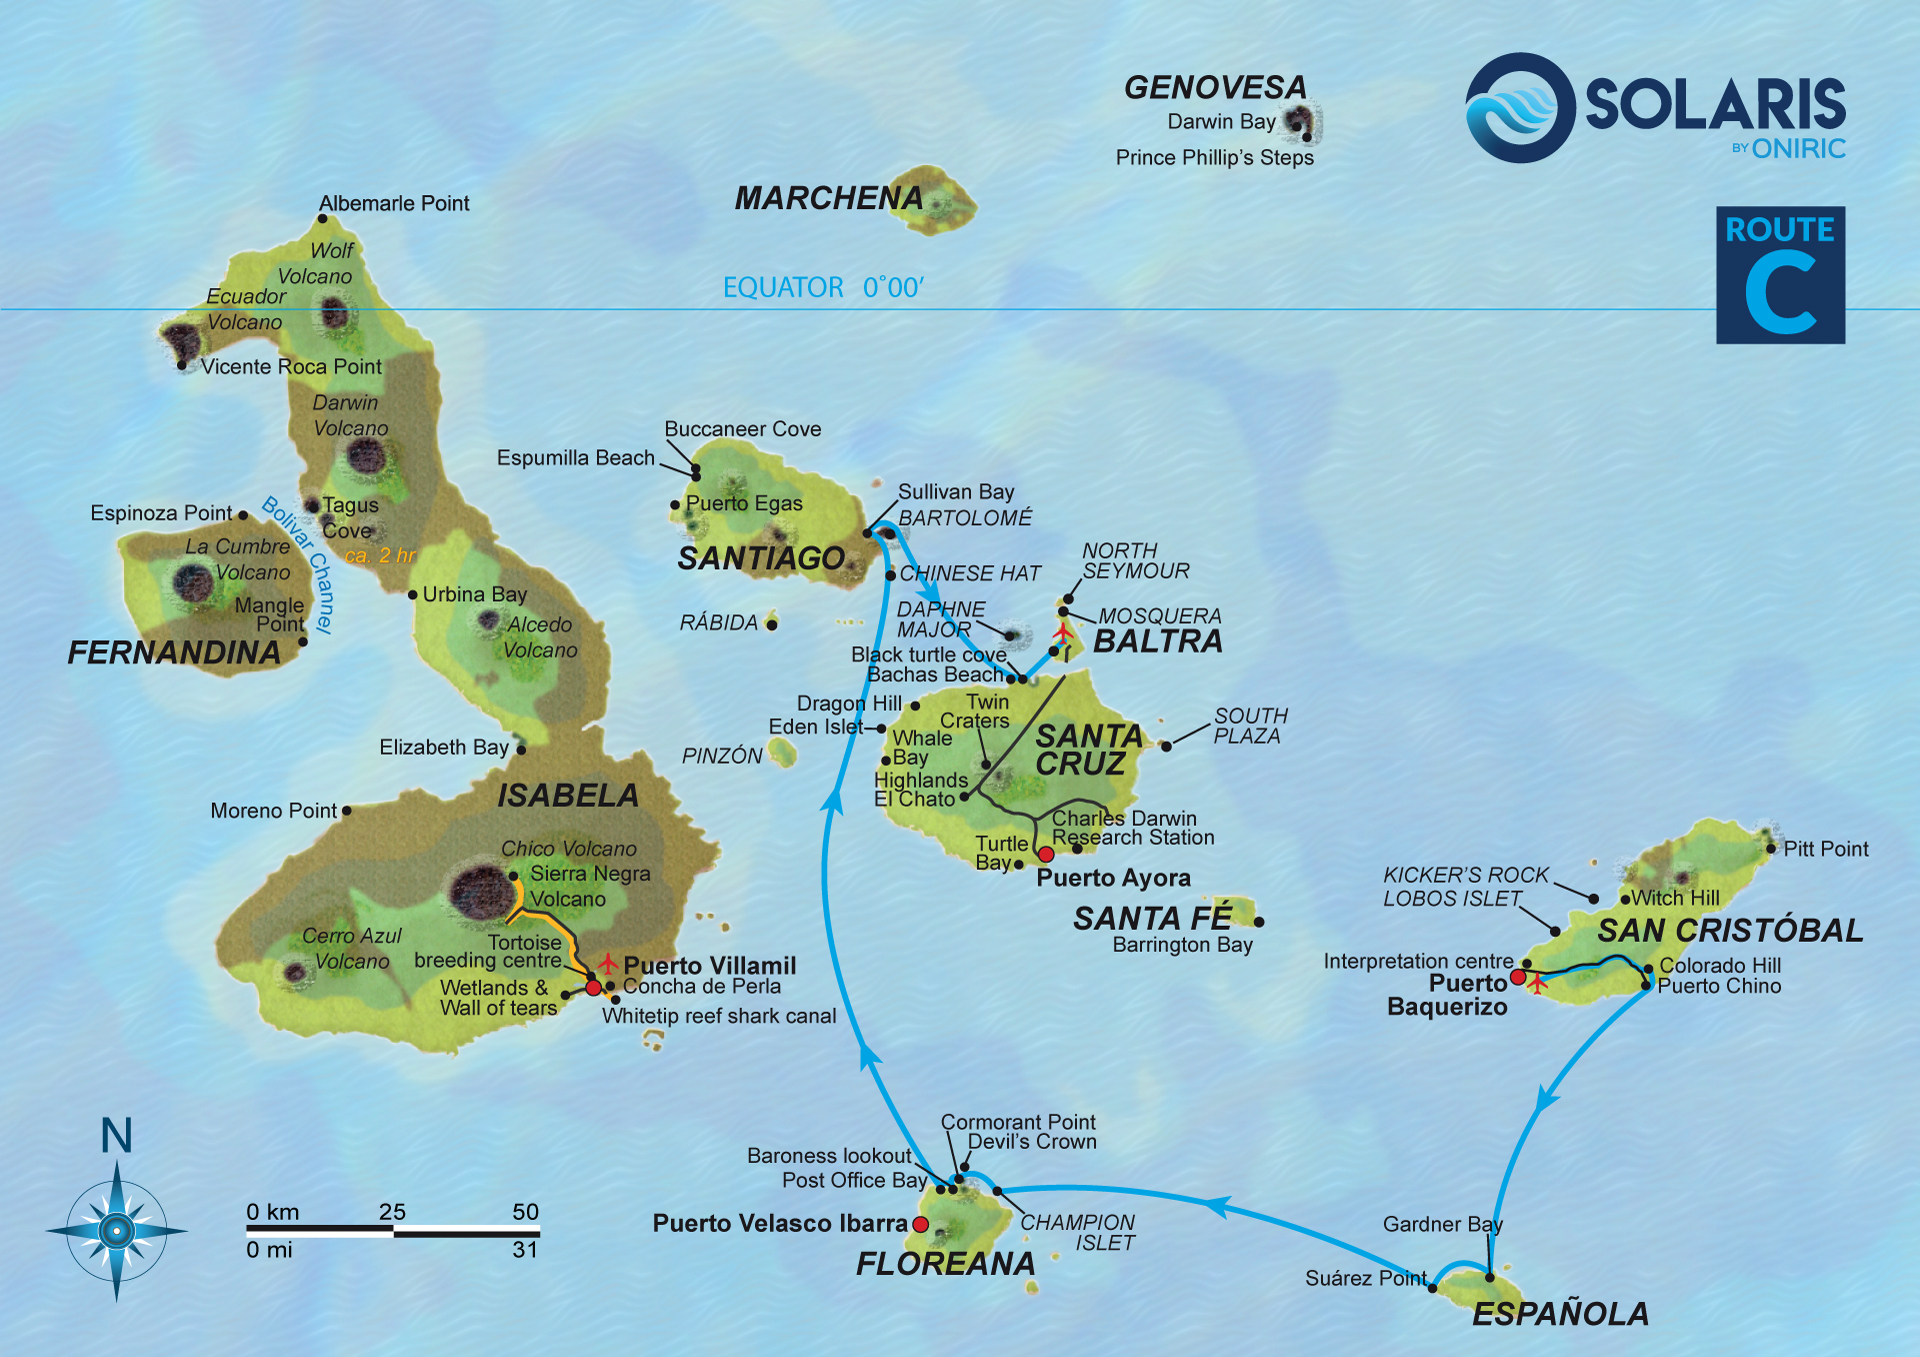 Galapagos Yacht M/Y Solaris Cruise Itinerary C route map